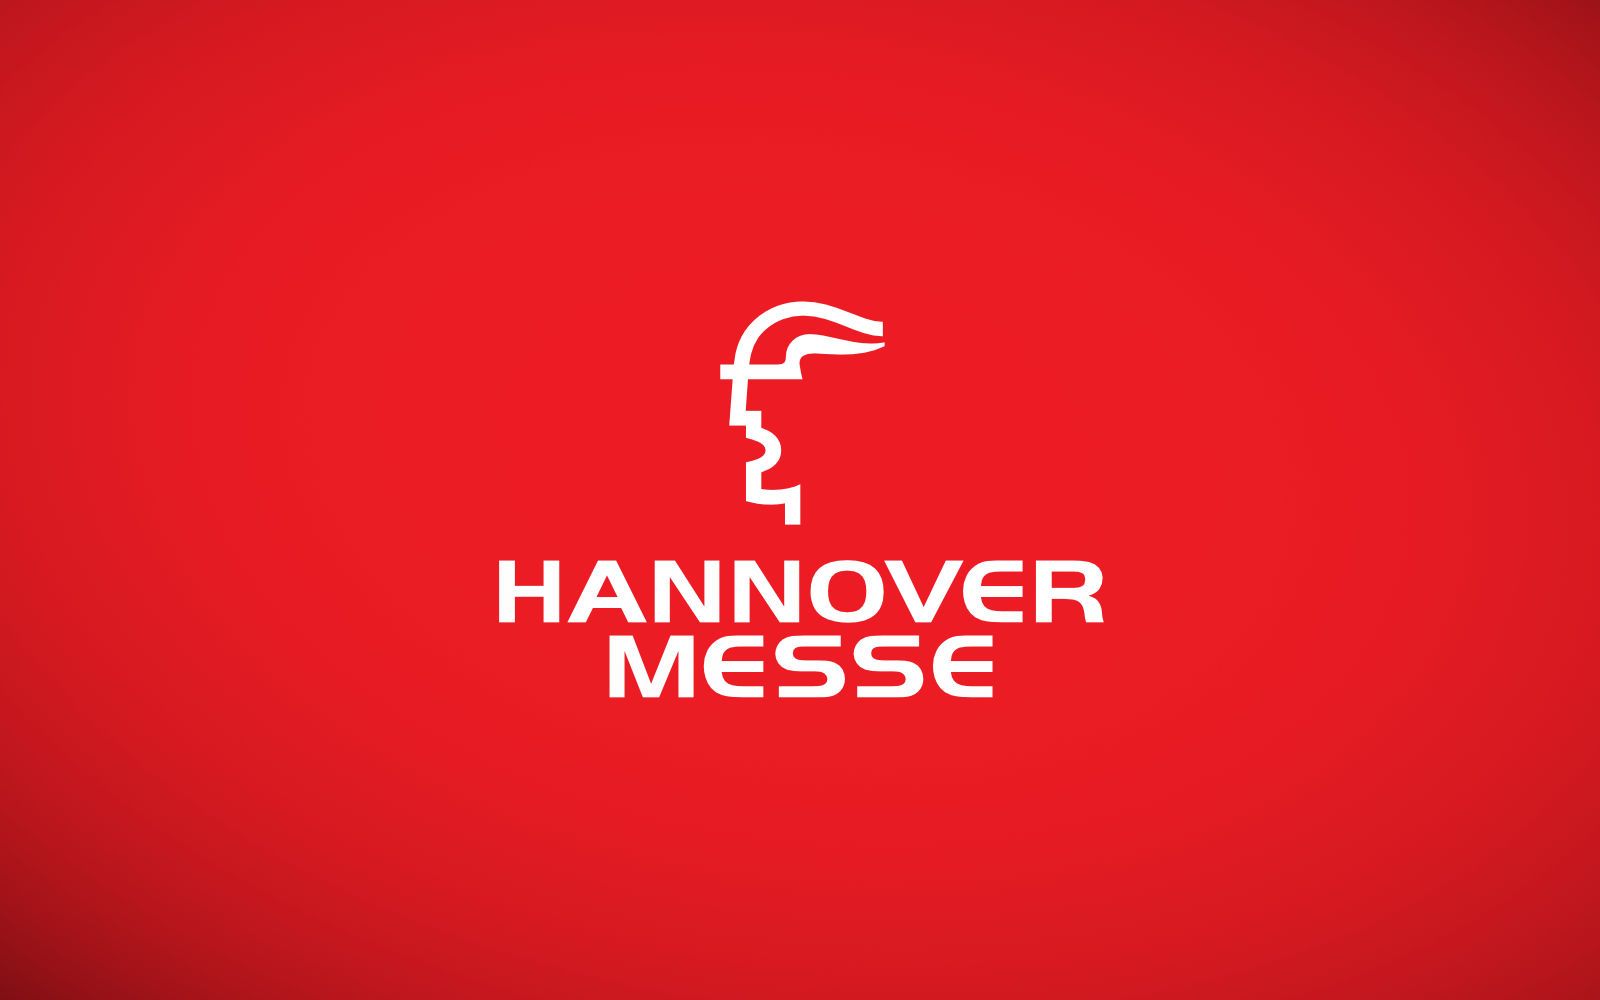 Logo of the Hannover Messe